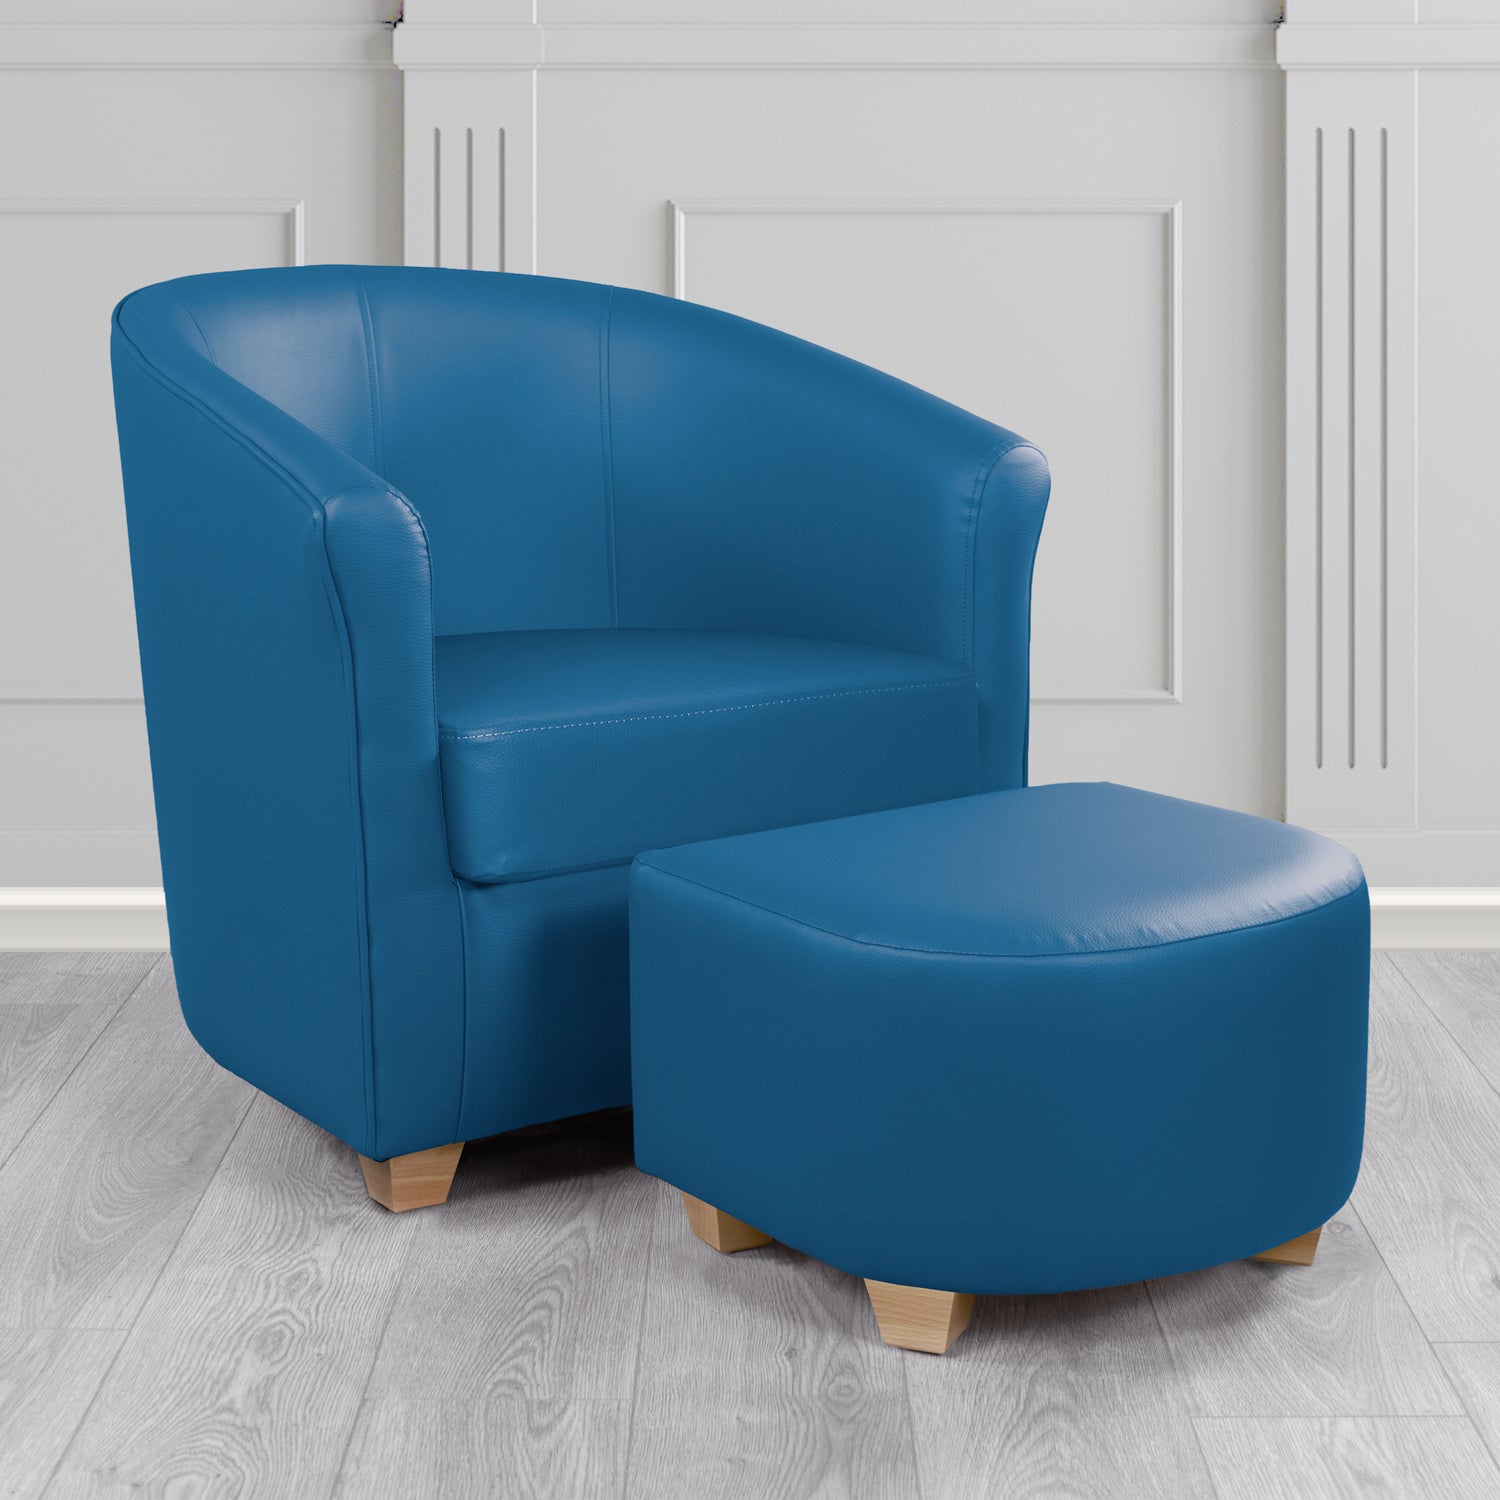 Cannes Tub Chair with Footstool Set in Madrid Royal Faux Leather - The Tub Chair Shop